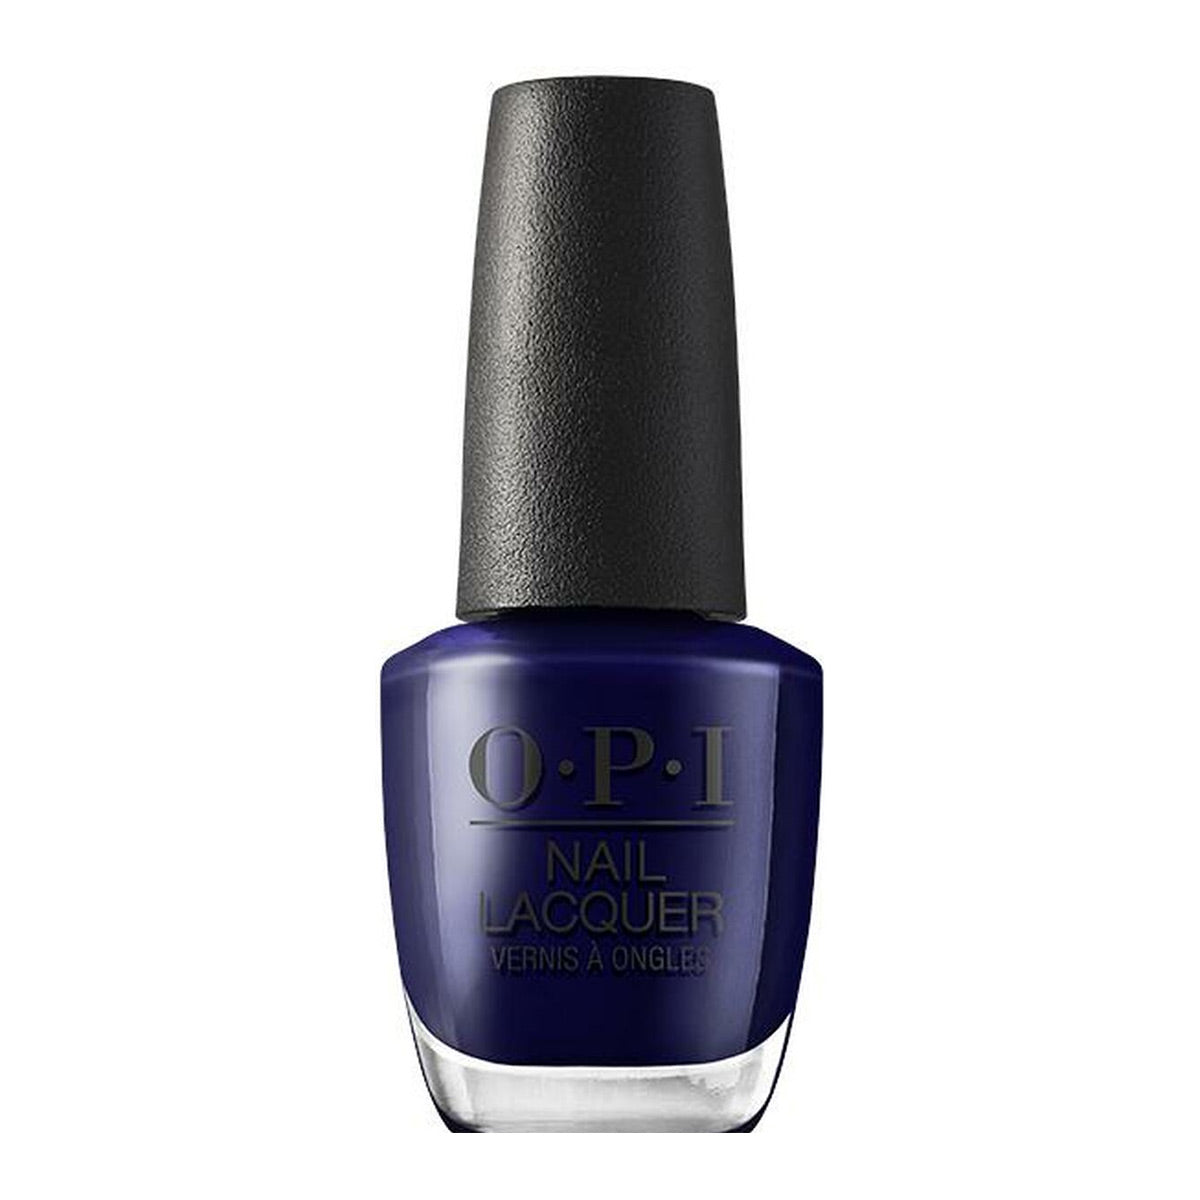 OPI Hollywood Nail Lacquer Collection | Award for Best Nails goes to